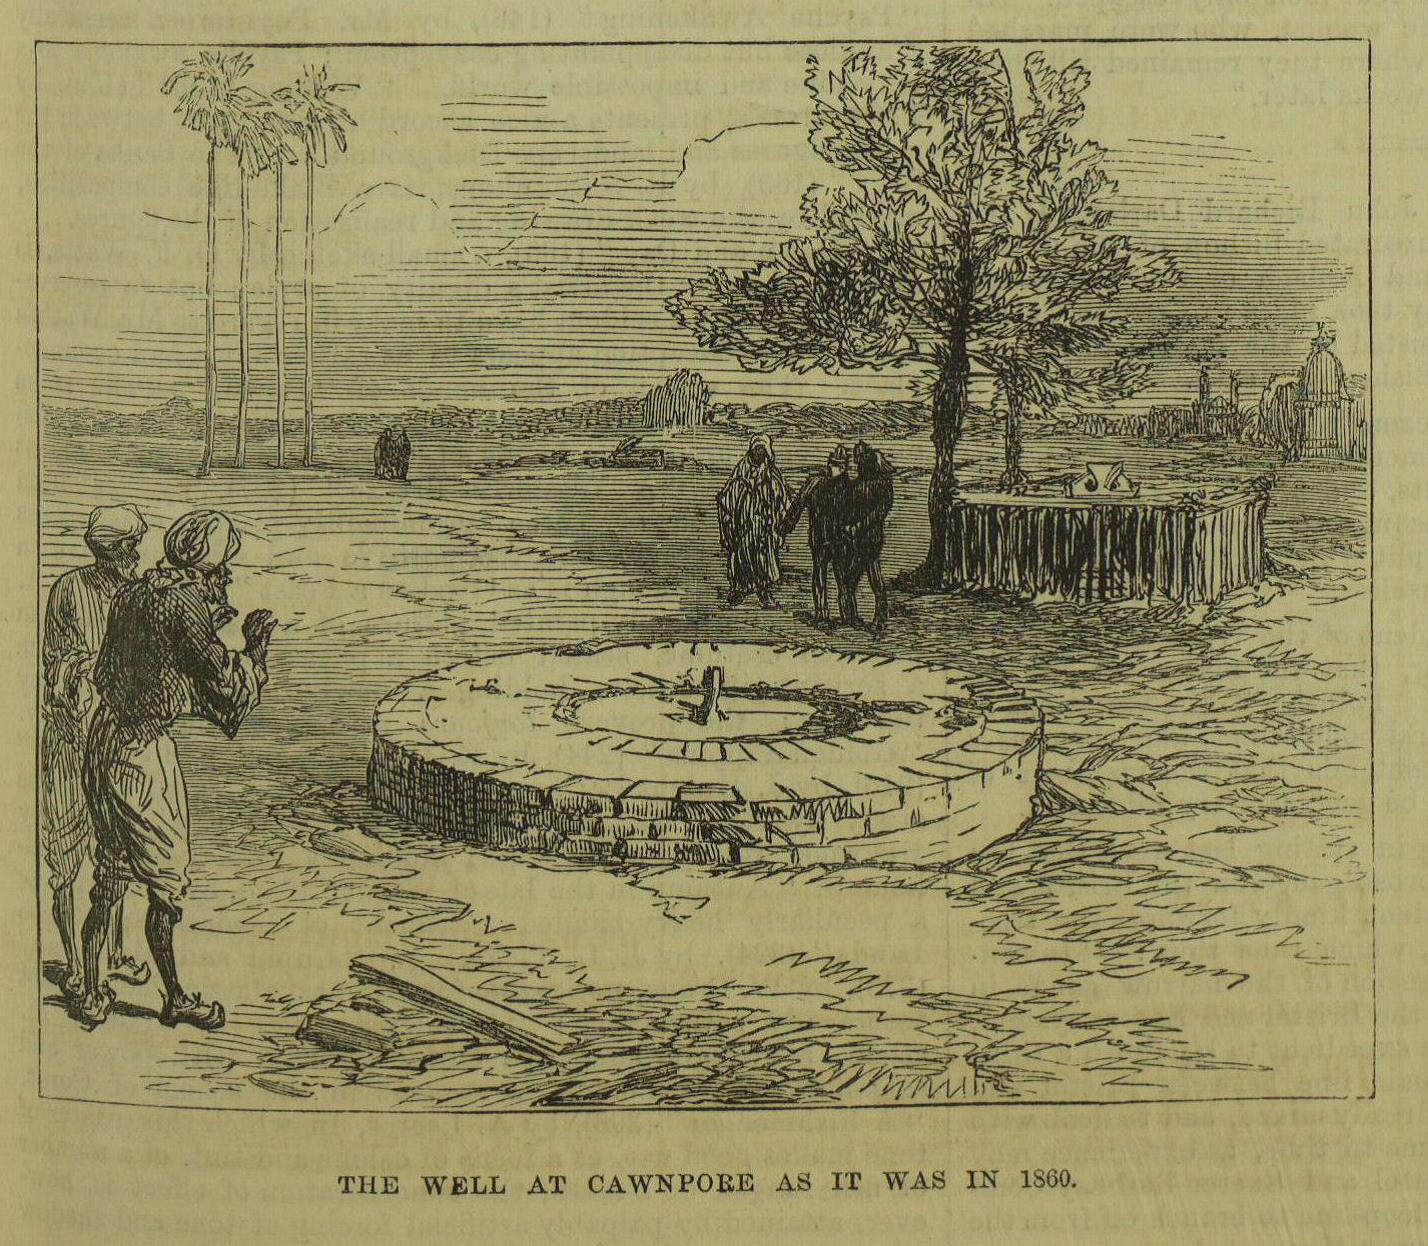 ‘The Well at Cawnpore as it was in 1860’, Illustrated London News, 31 October 1874, p. 421.